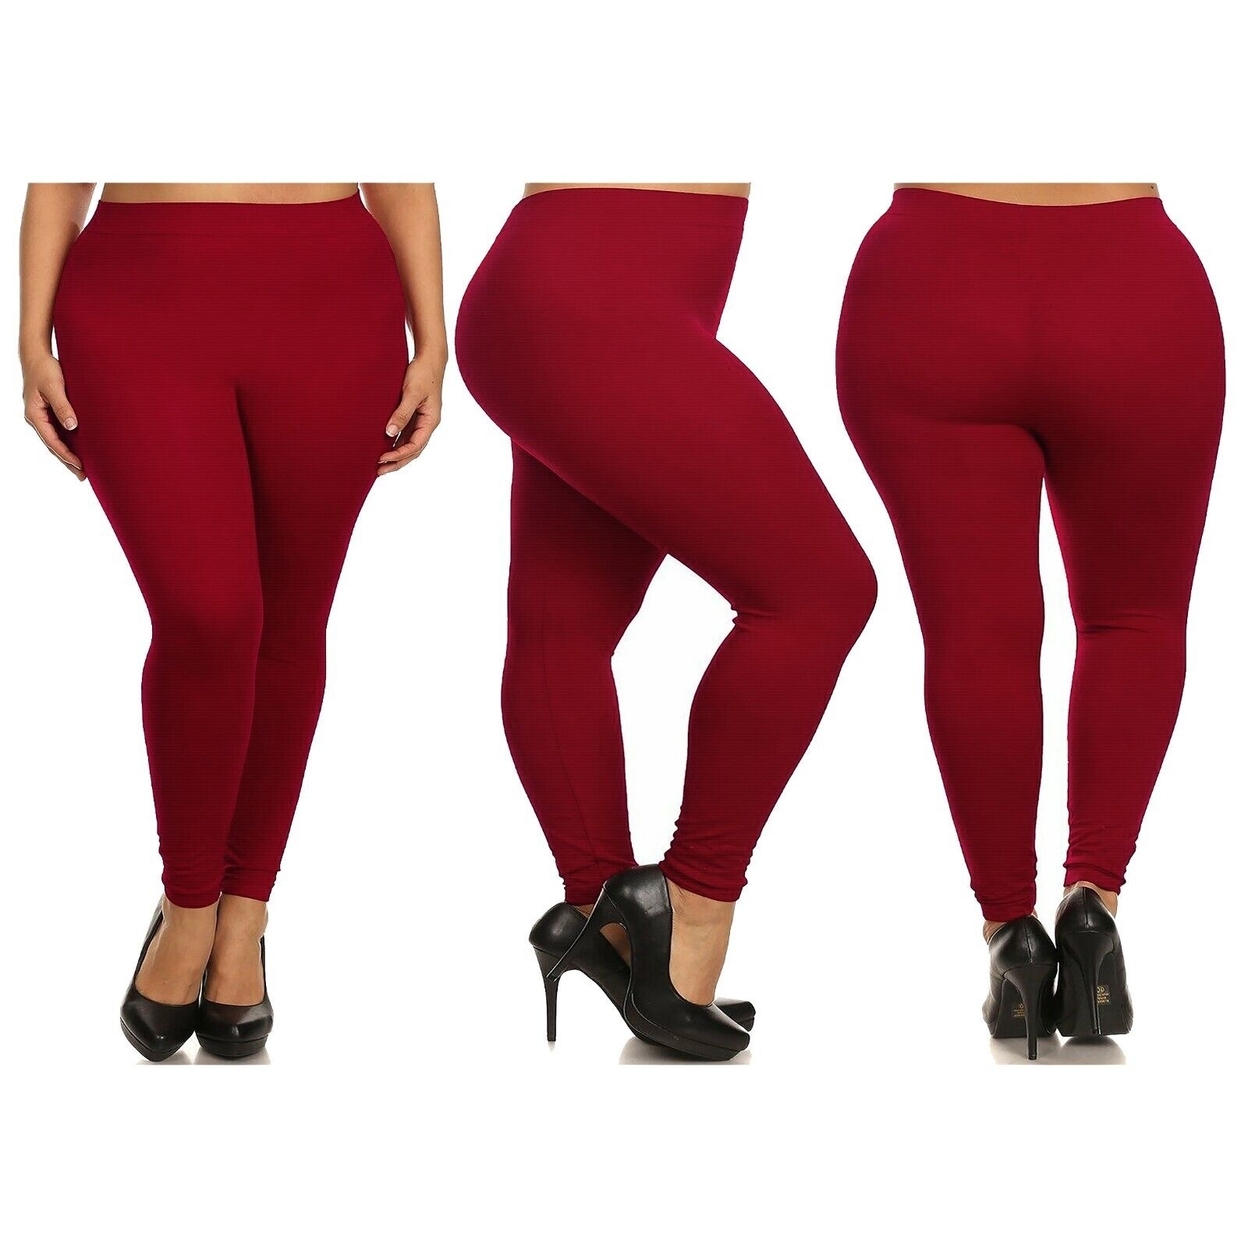 Multi-Pack: Women's Casual Ultra-Soft Smooth High Waisted Athletic Active Yoga Leggings Plus Size Available - 3-pack, 3x